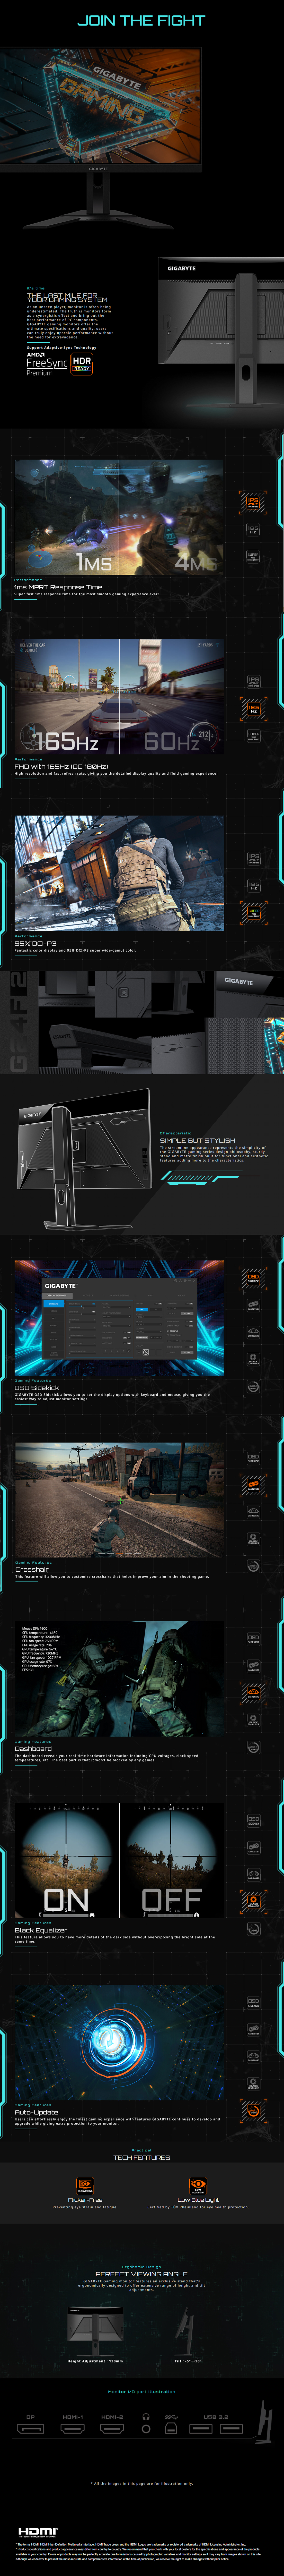 A large marketing image providing additional information about the product Gigabyte G24F-2 23.8" FHD 180Hz IPS Monitor - Additional alt info not provided